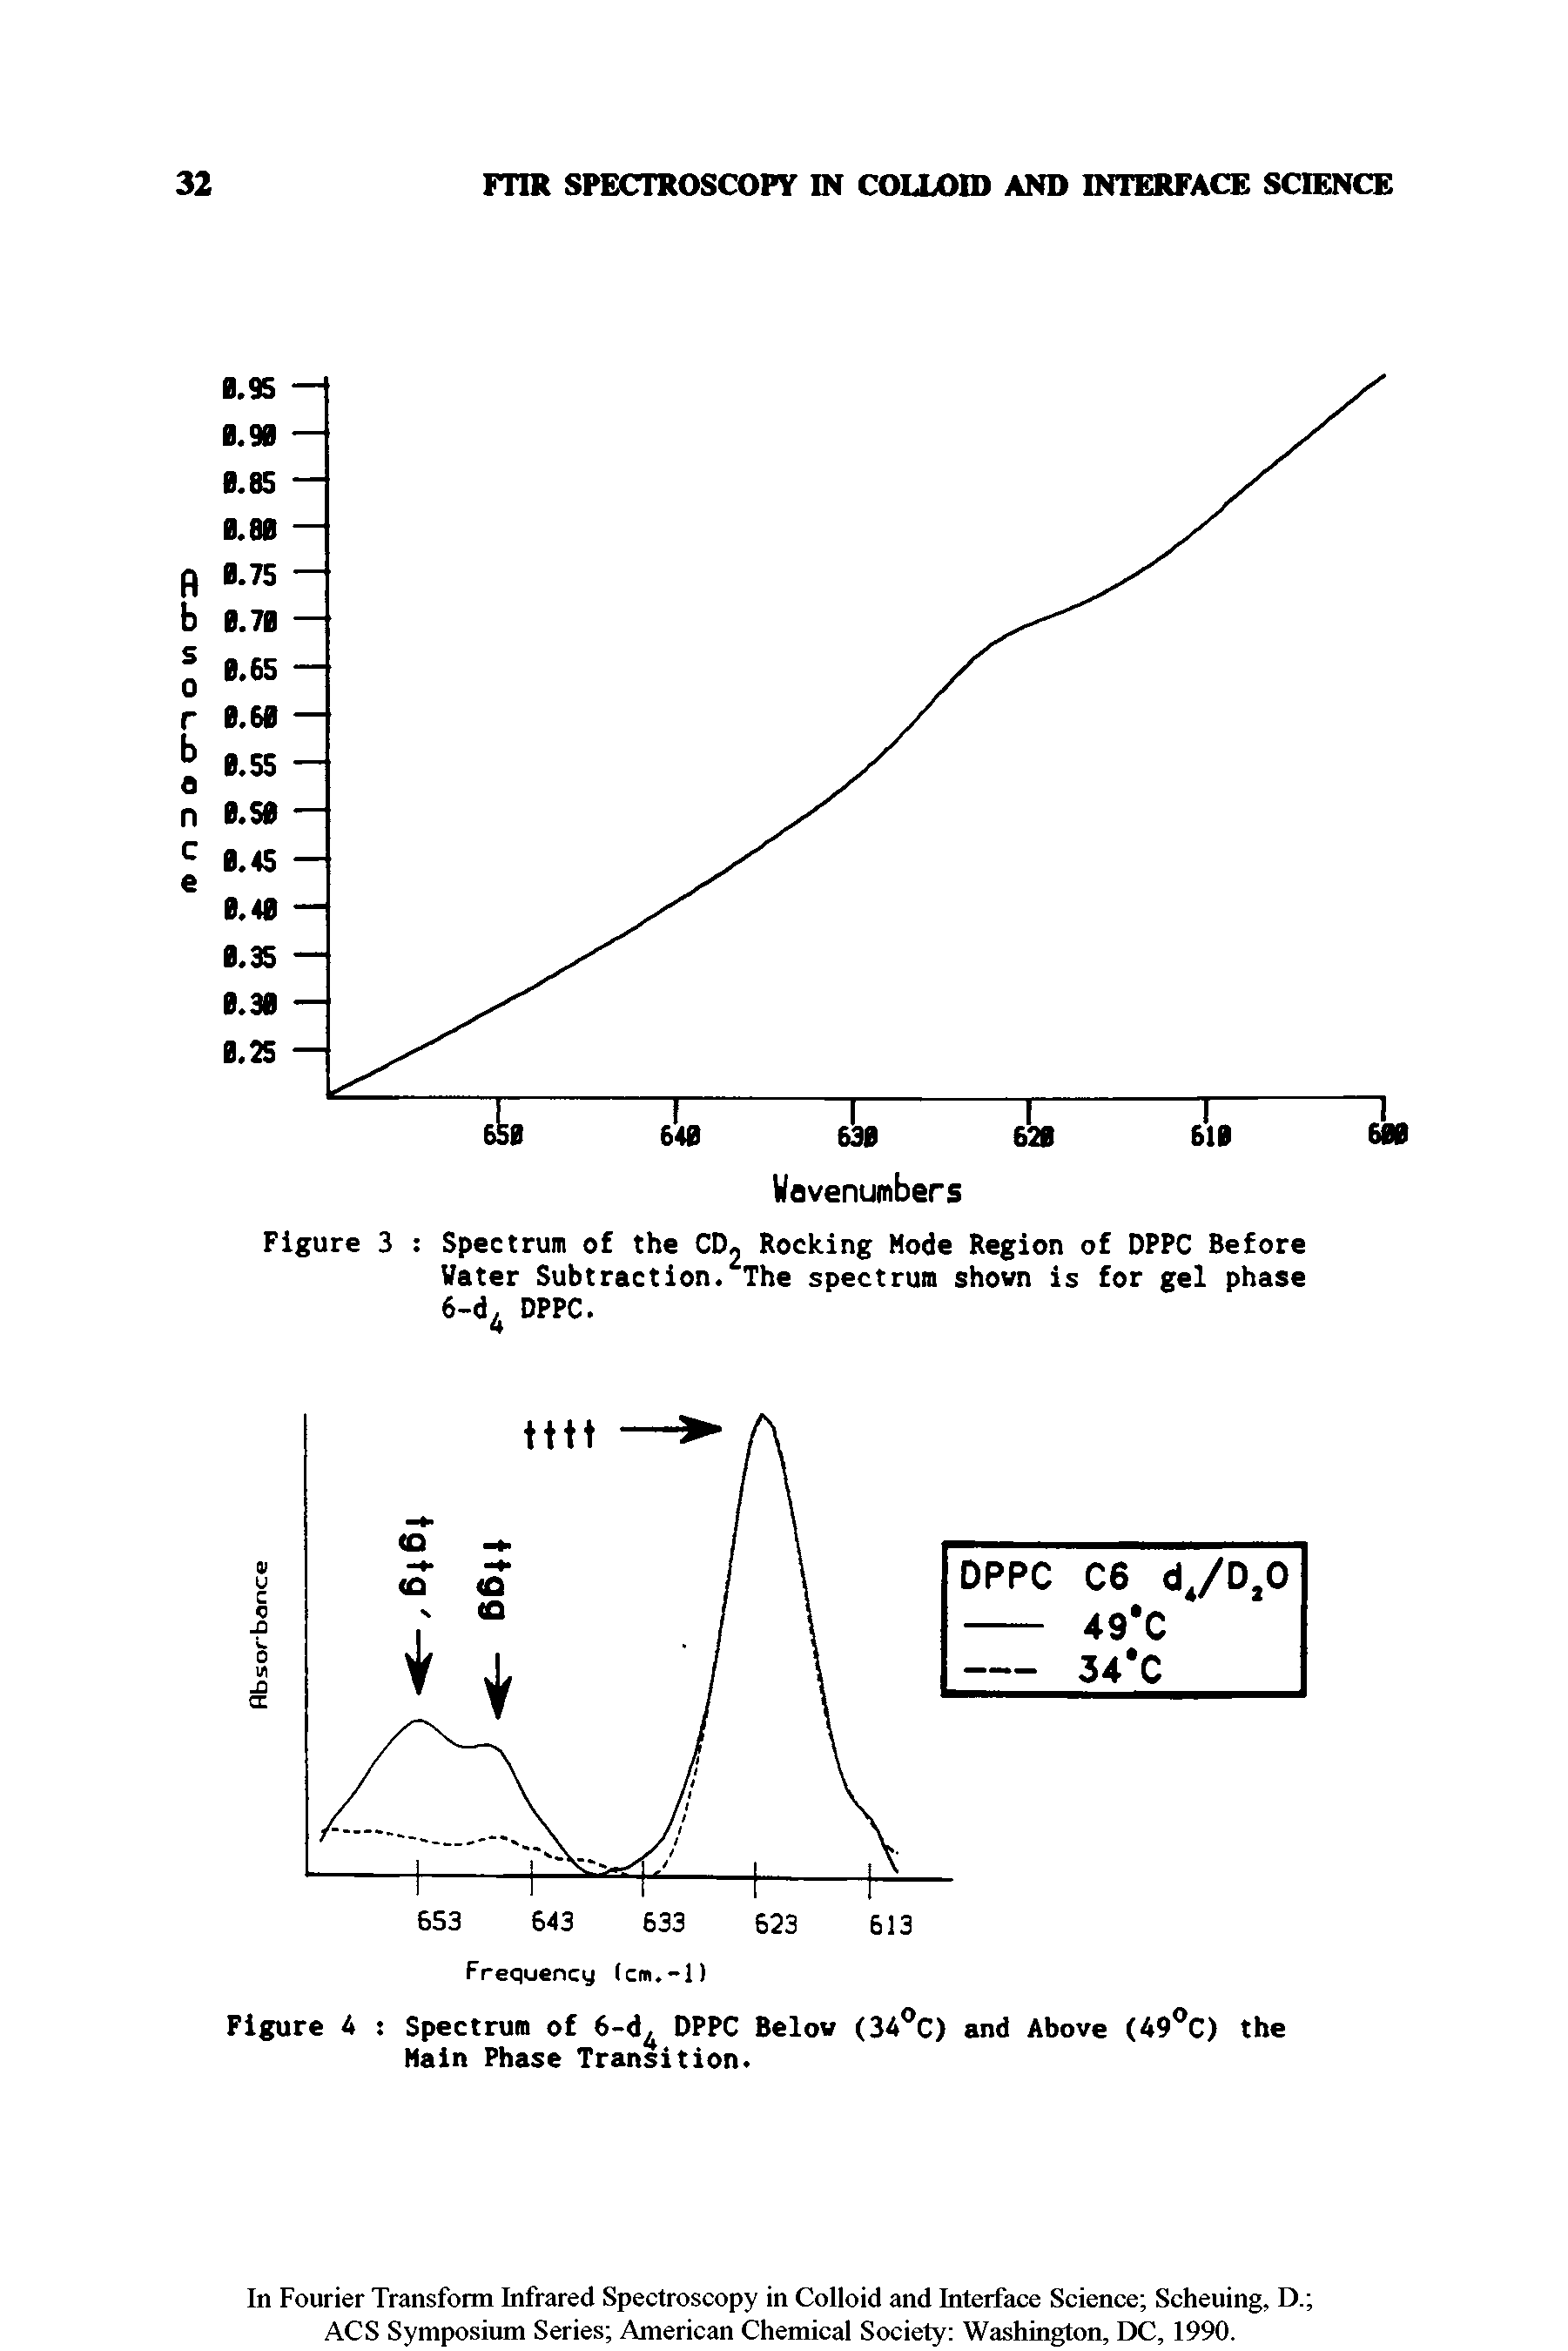 Figure 4 Spectrum of 6-d DPPC Belov (34°C) and Above (49°C) the Main Phase Transition.